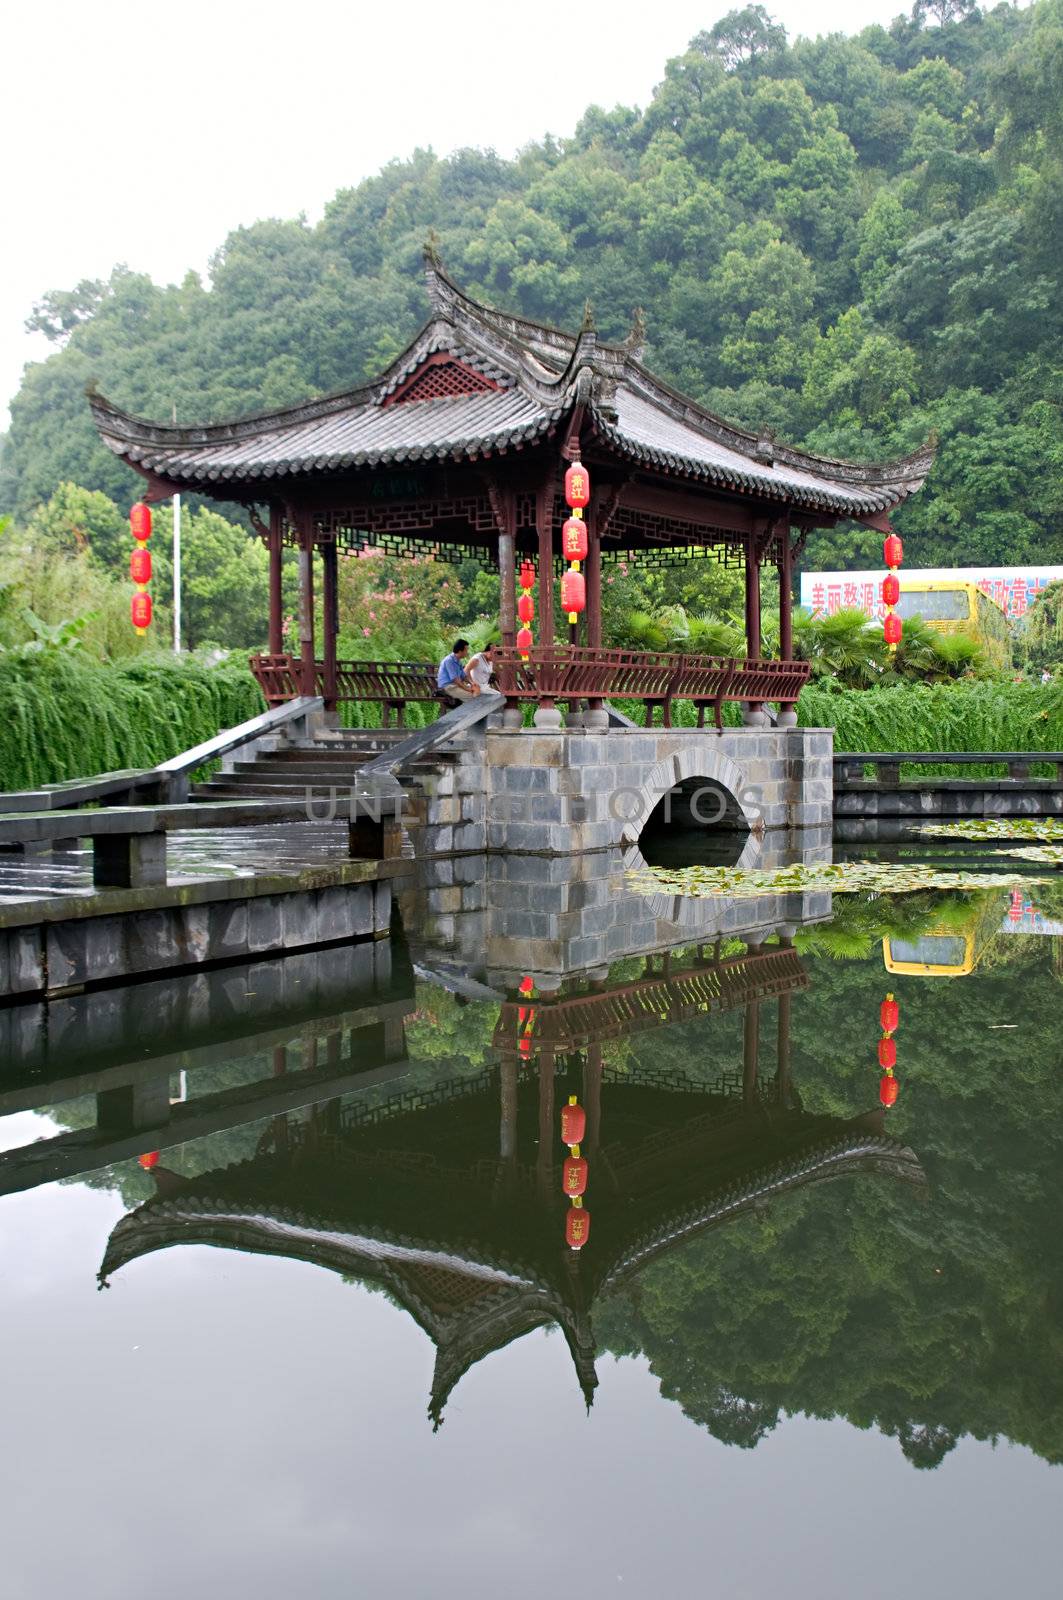 The house and  pavilion of Chinese garden, jiangxi